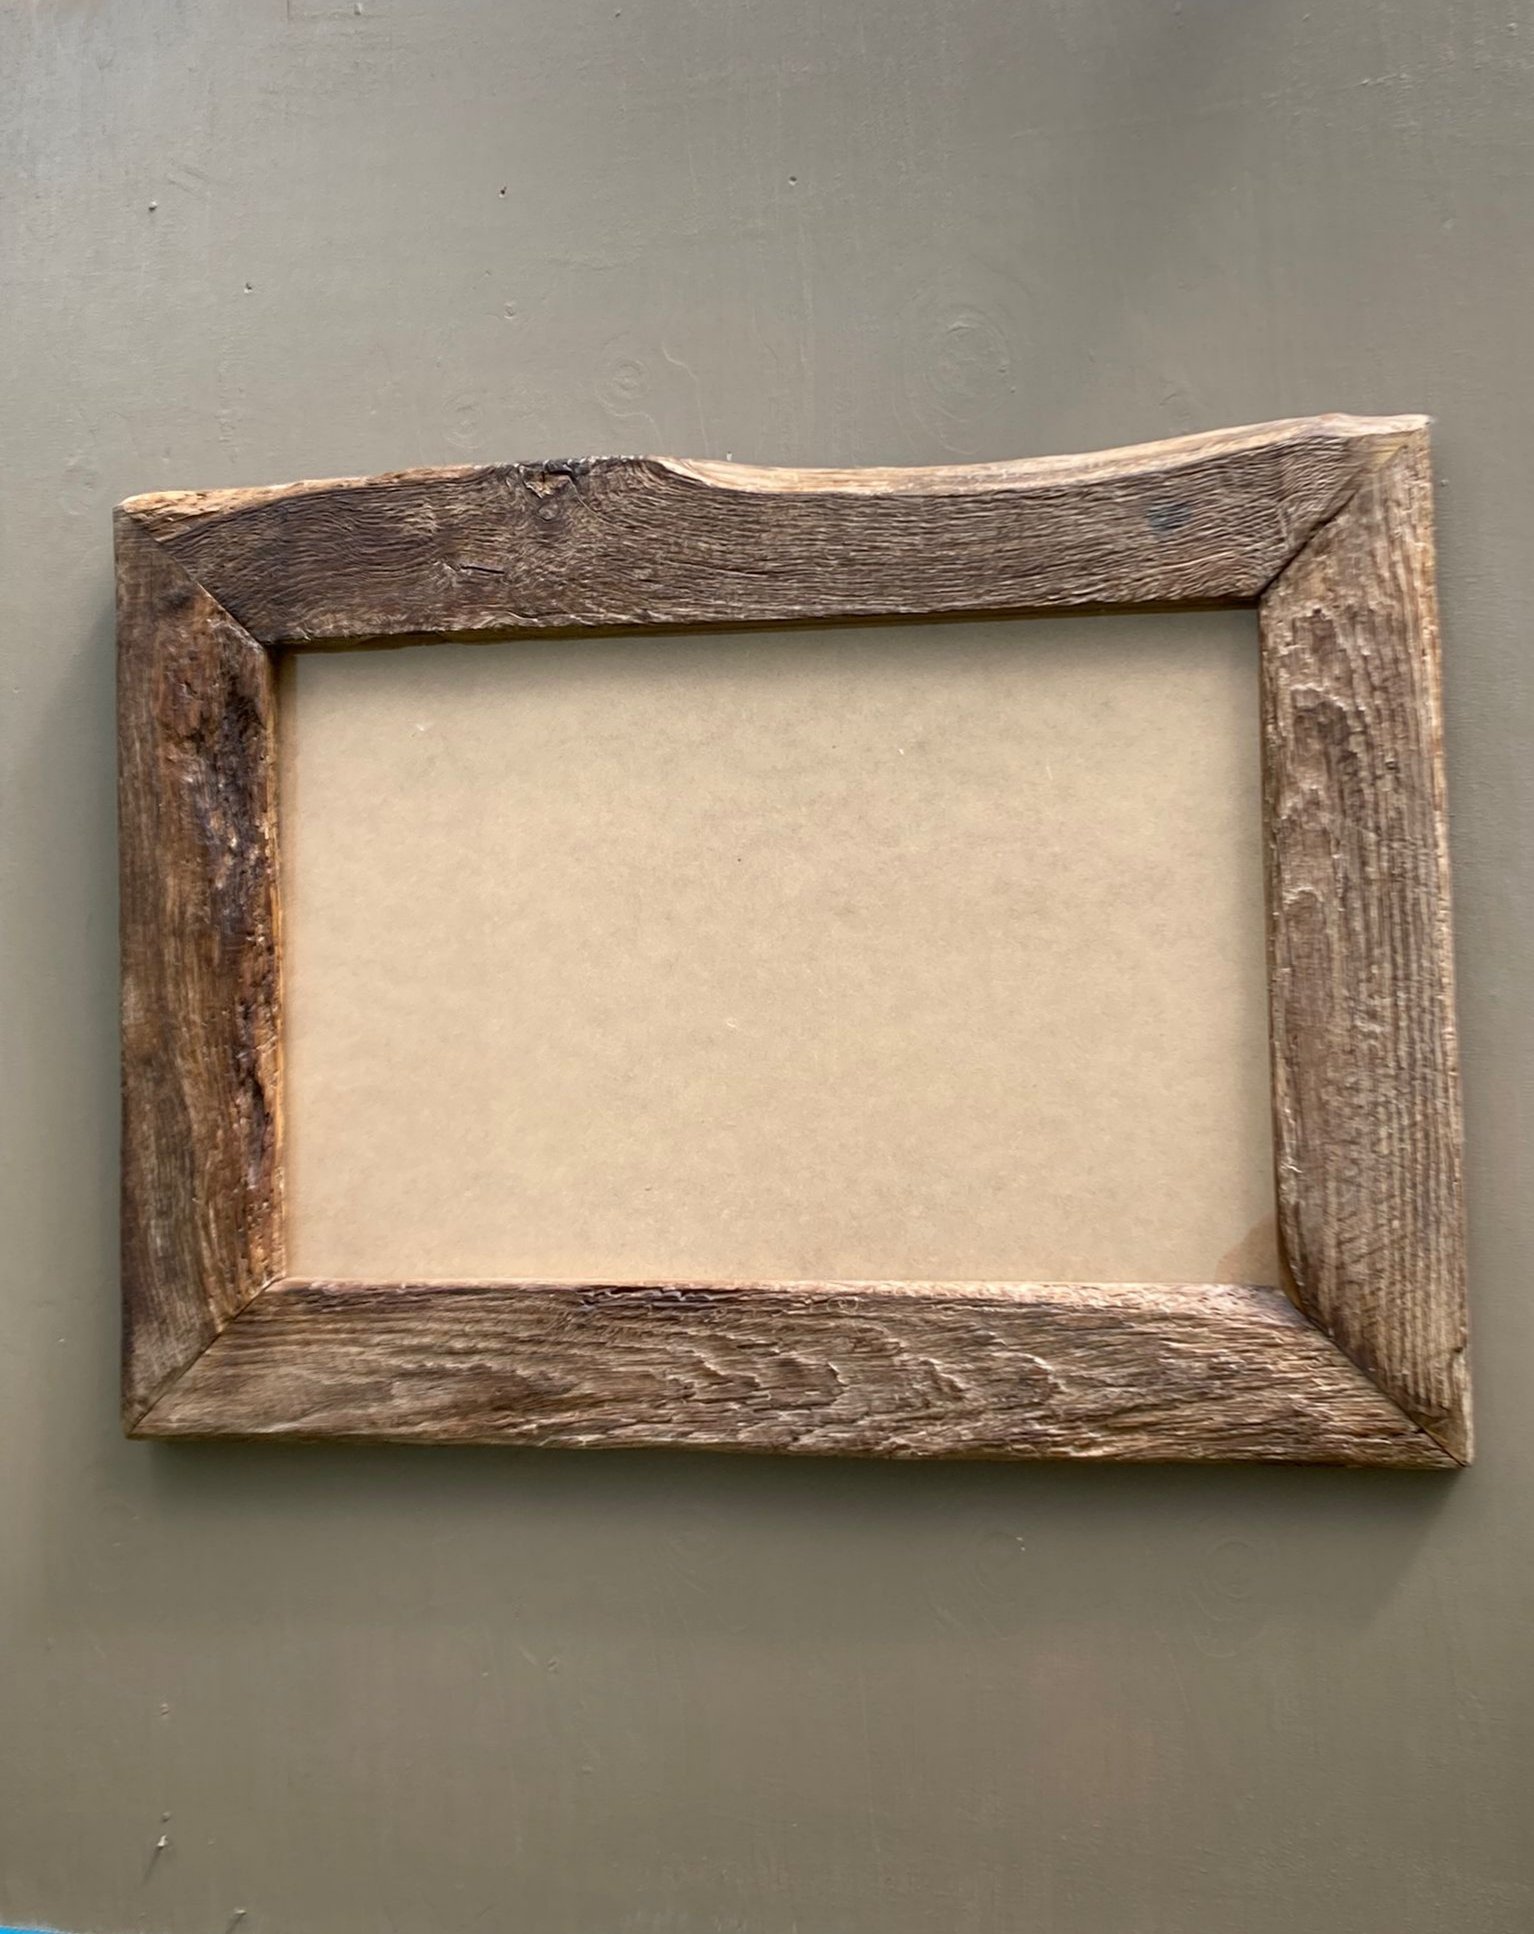 18x24 Picture Frame Montana Style Reclaimed Barn Wood Rustic Decor Extra Large 2 Inch Wide Handmade Naturally Weathered Western Farmhouse Decorative Family Photo Wedding Gloss Finish. 